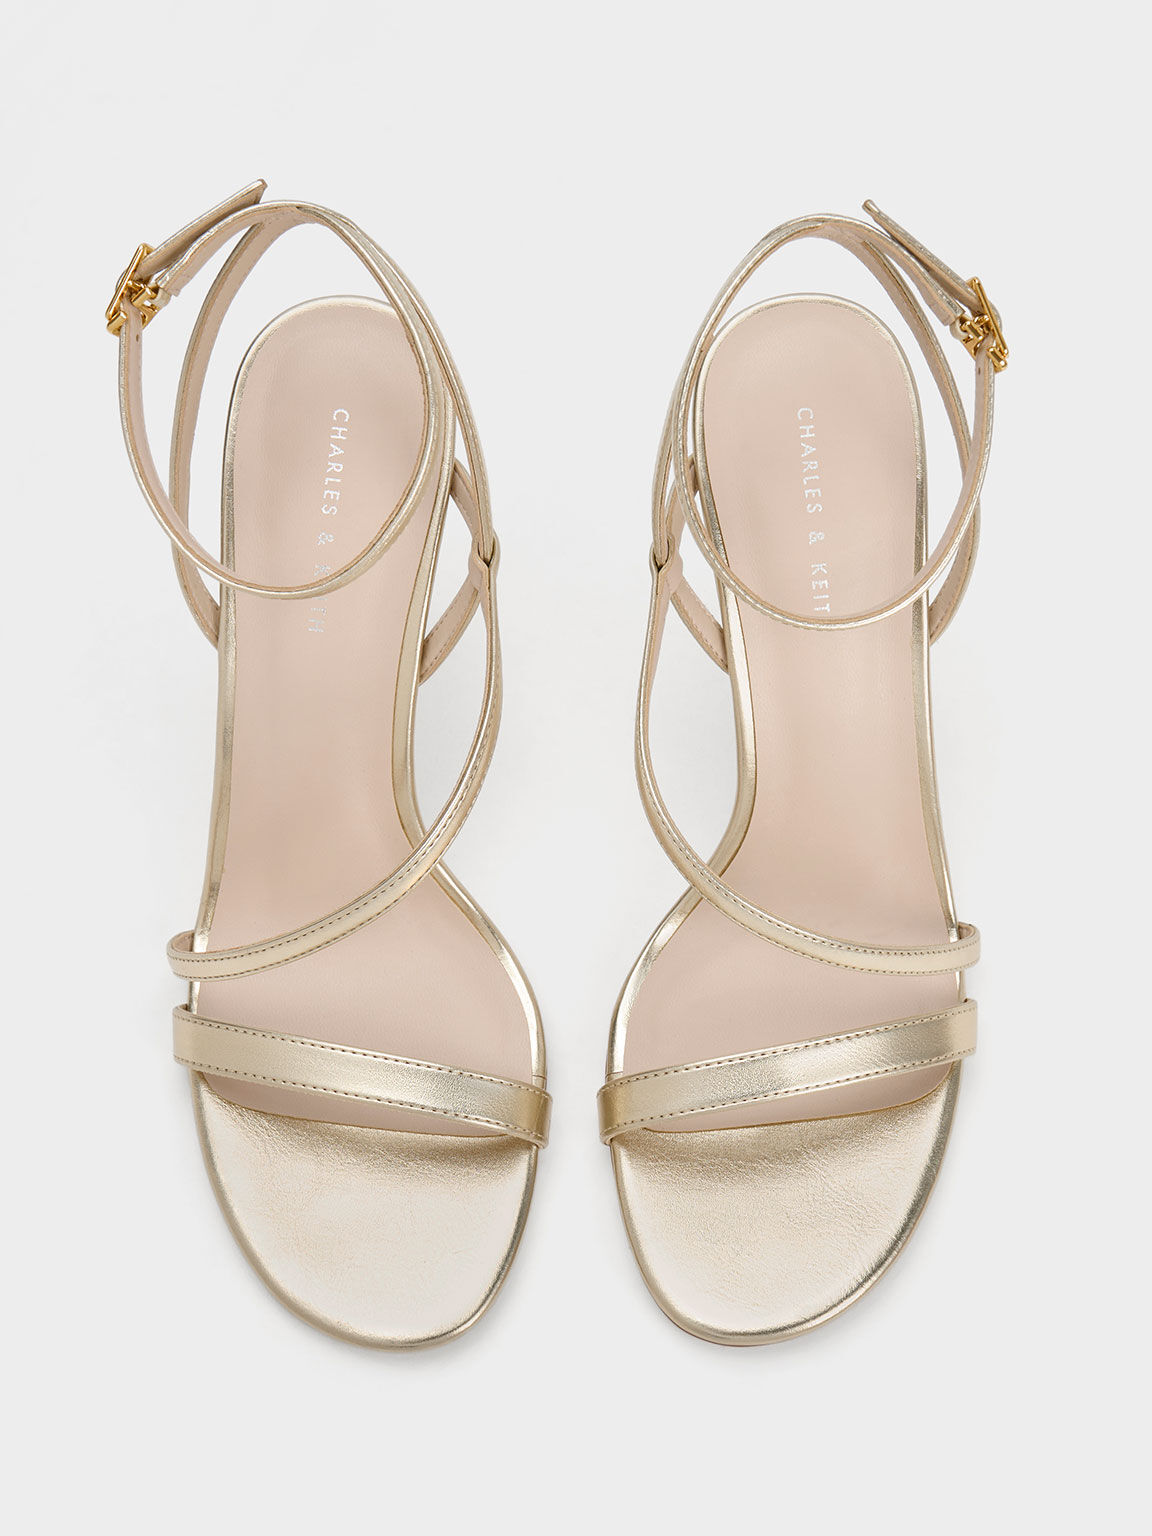 Guess Gold Strappy Heeled Sandals